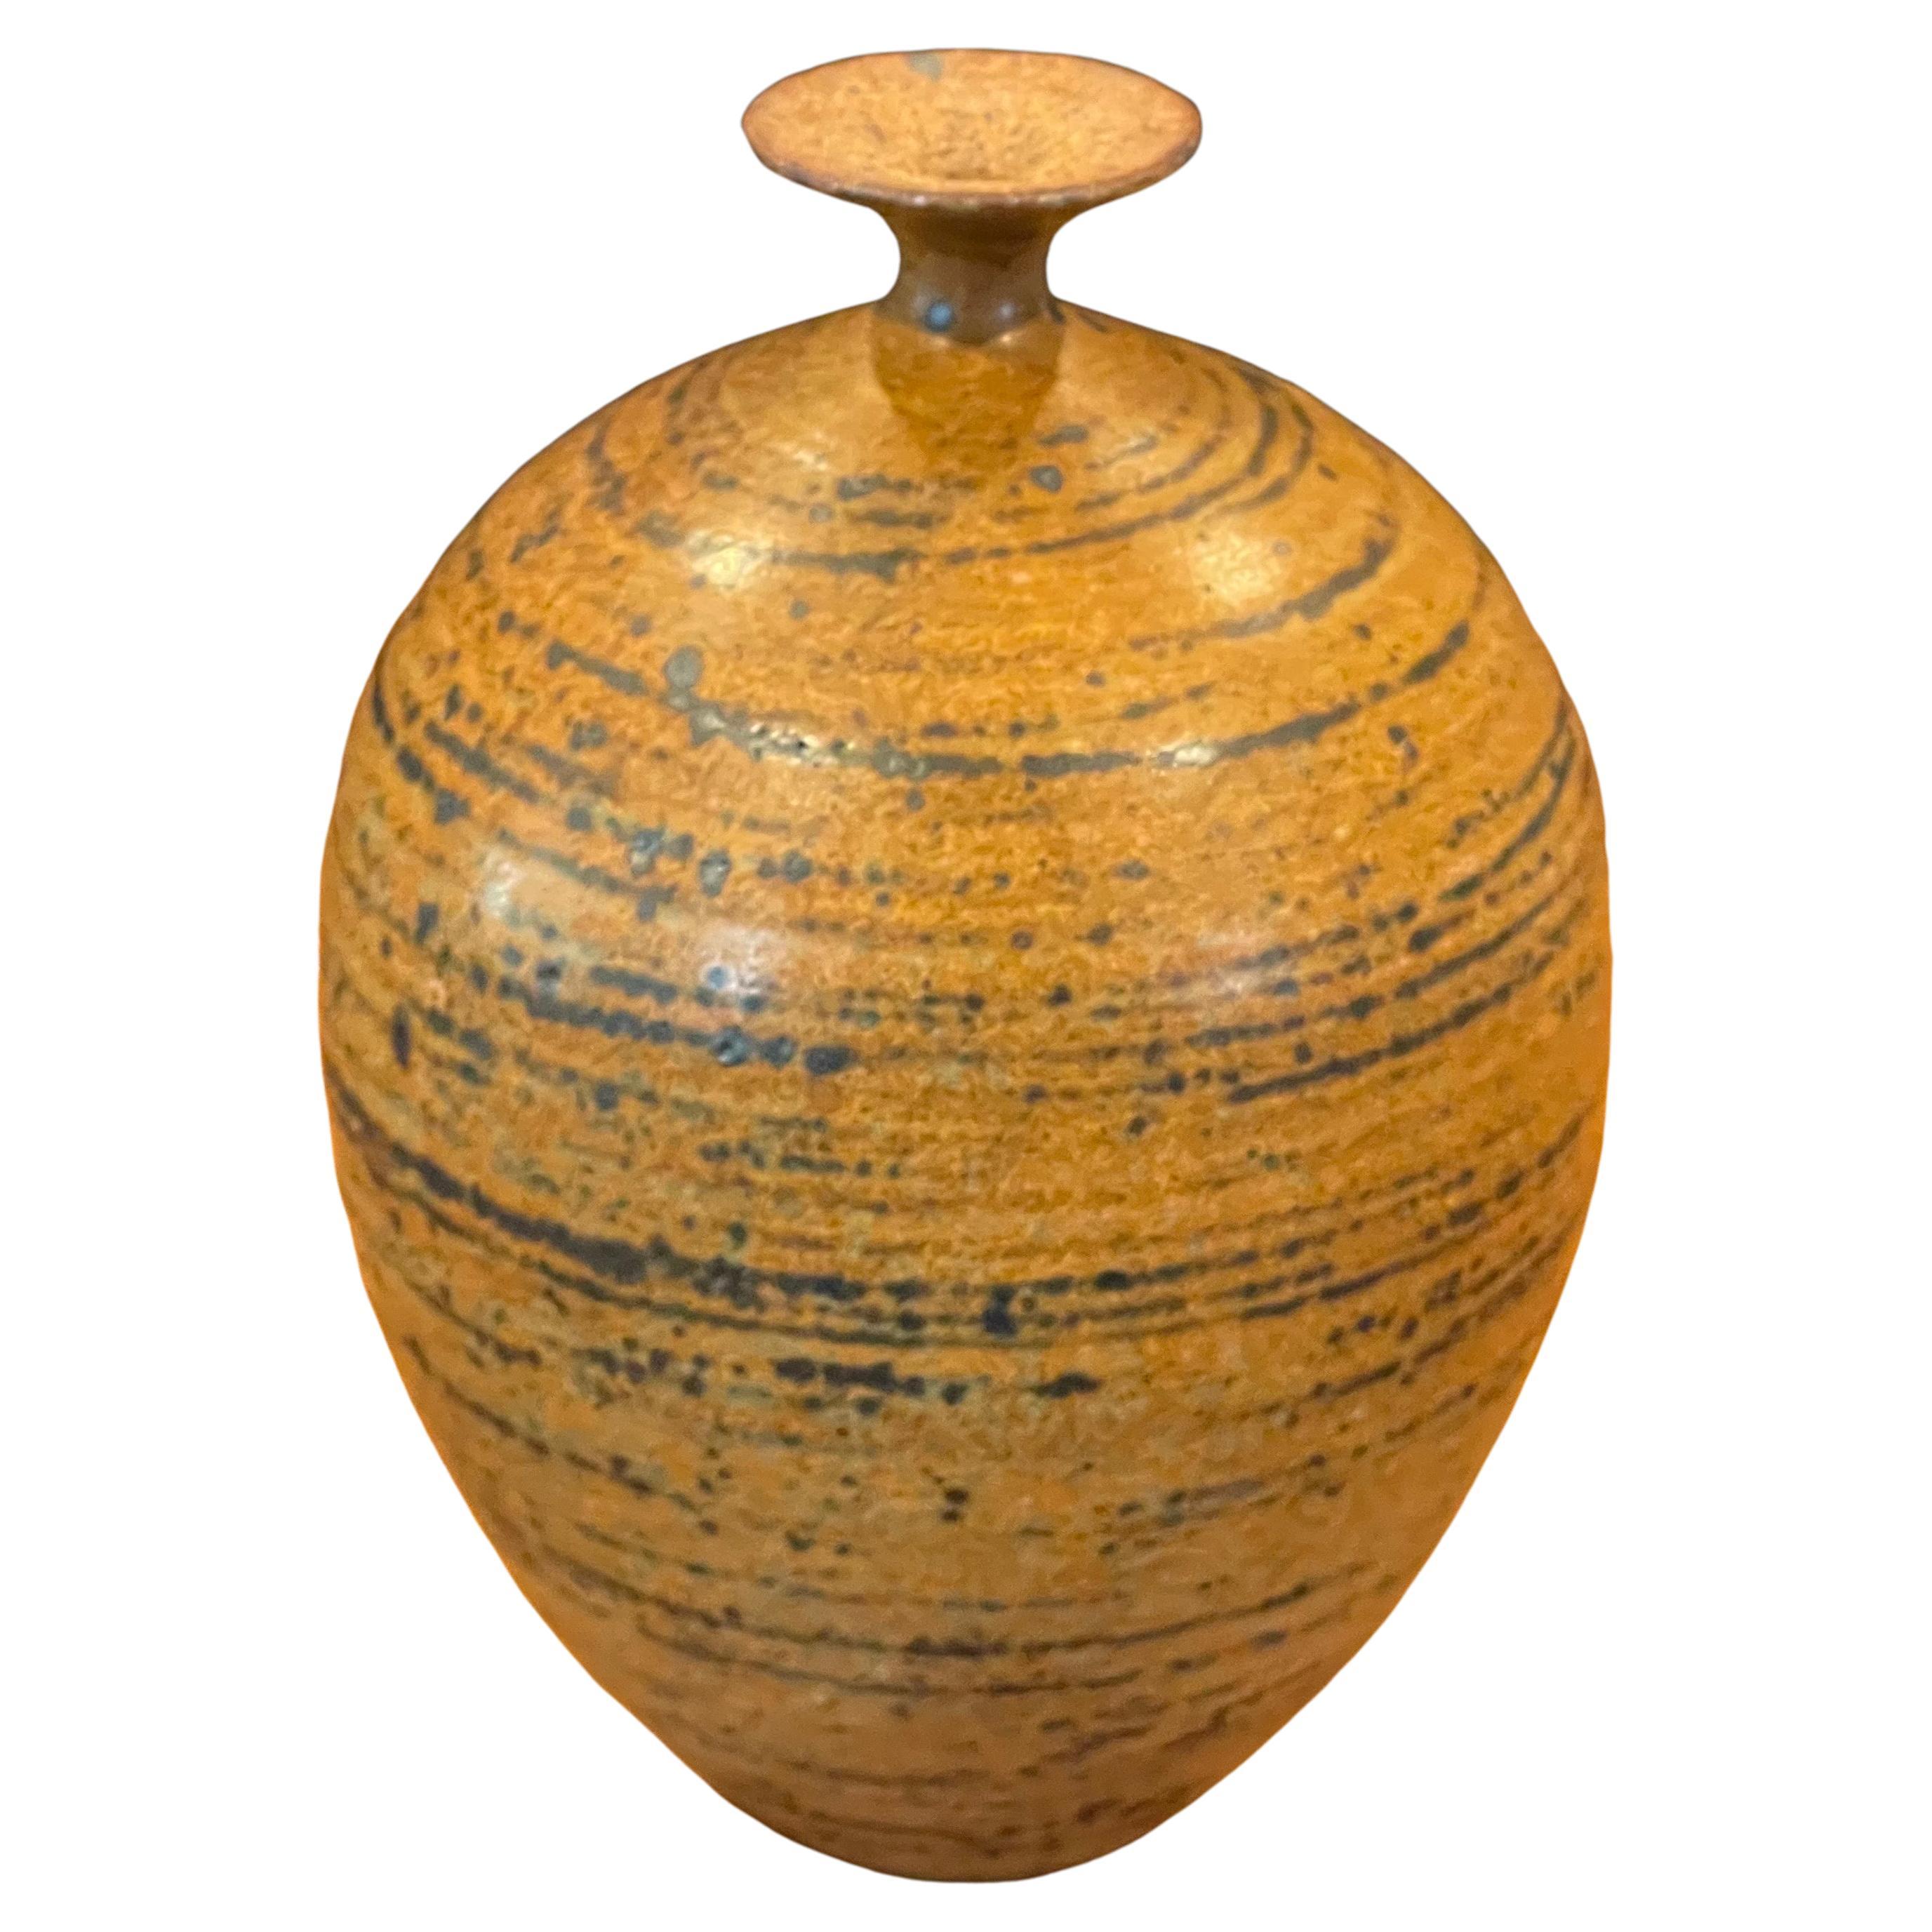 An absolutely stunning California design stoneware weed pot / vase by noted San Diego, CA potter Wayne Chapman, circa 1970. The pot is in very good vintage condition and measures 4.5